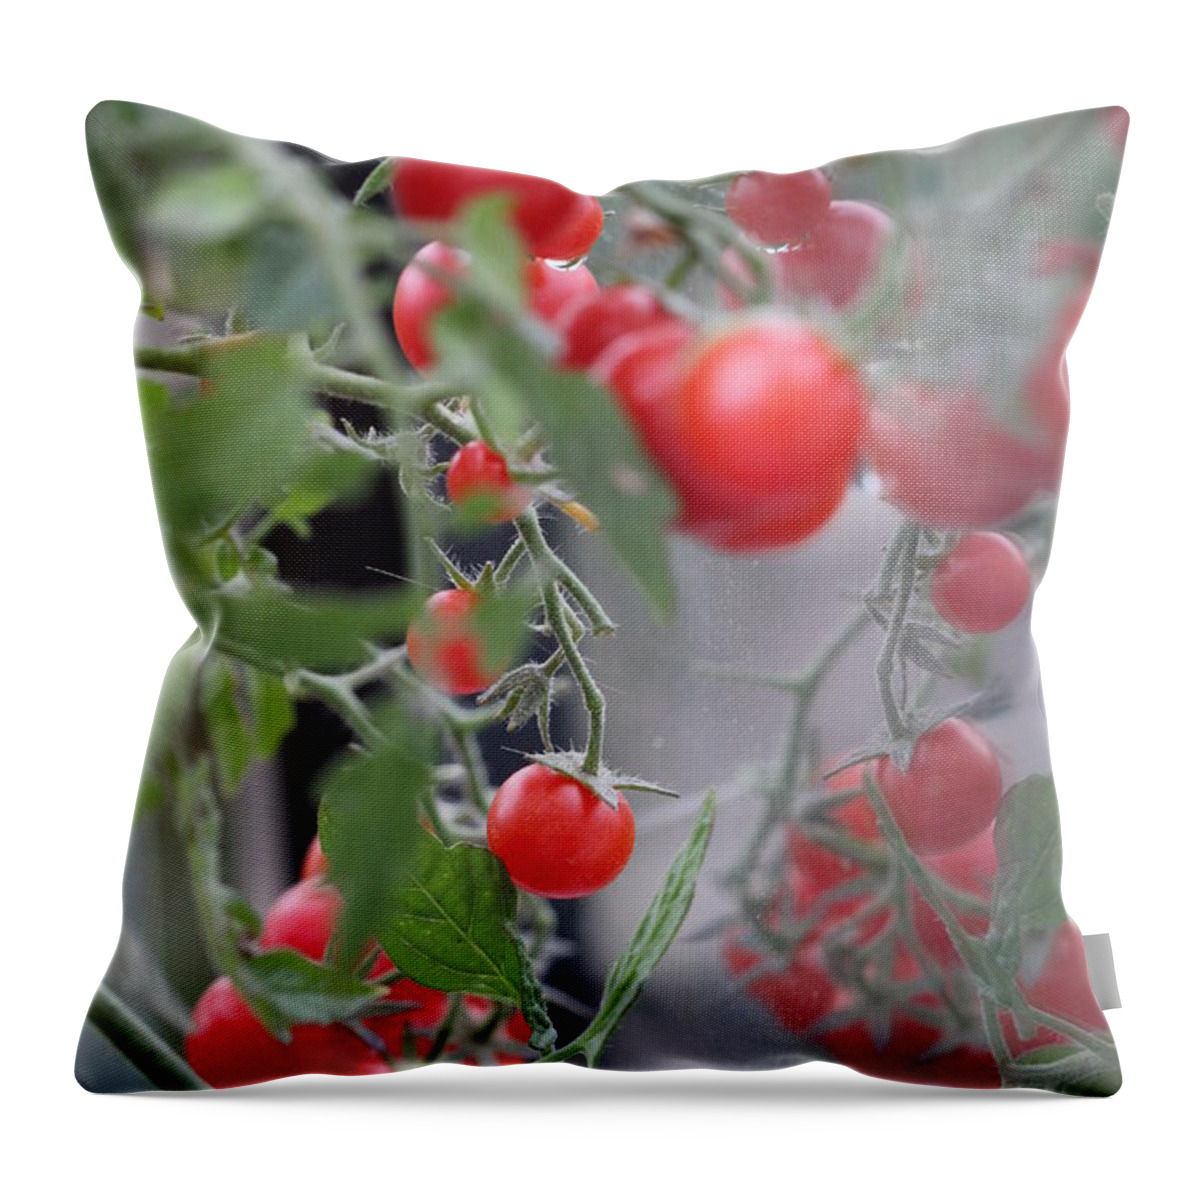 Tomatoes Throw Pillow featuring the digital art Tomatoes by Donna L Munro